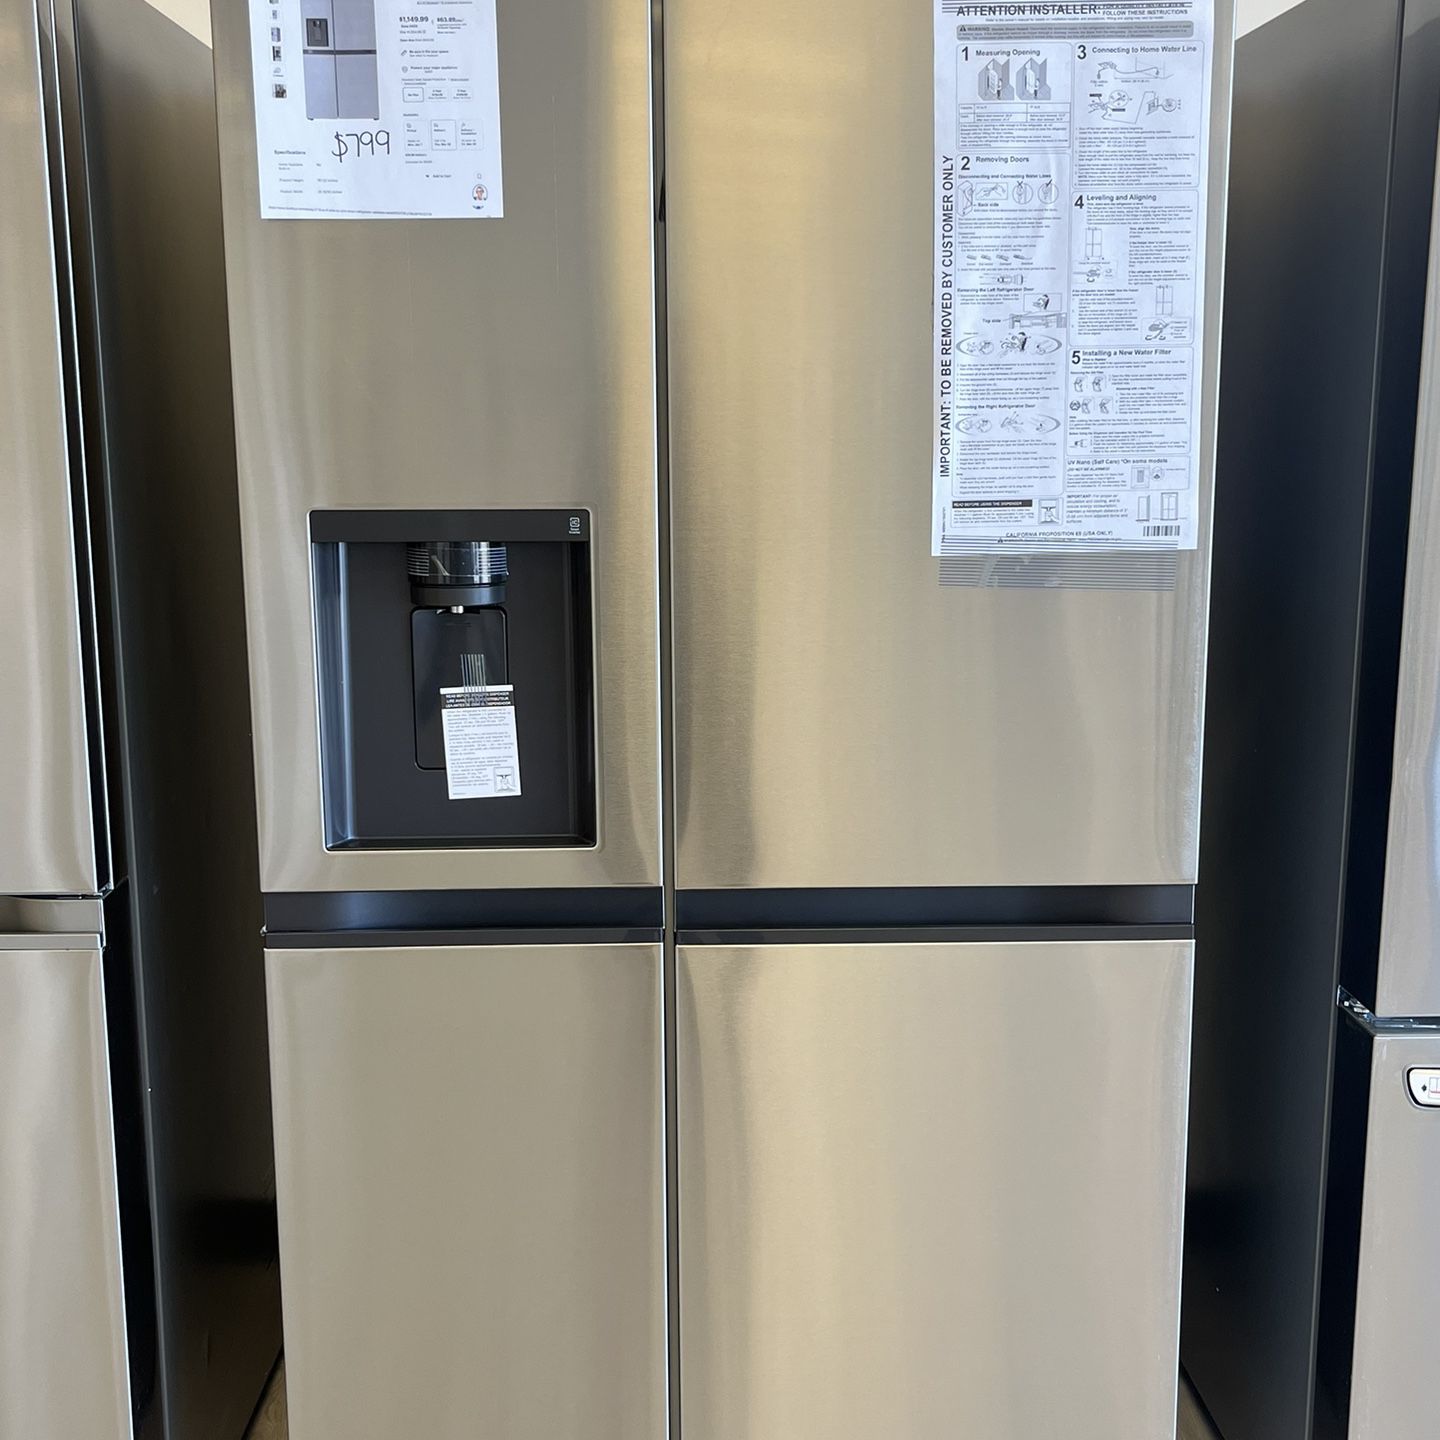 LG - 27.6 Cu. Ft. Side-by-Side Smart Refrigerator - Stainless Steel